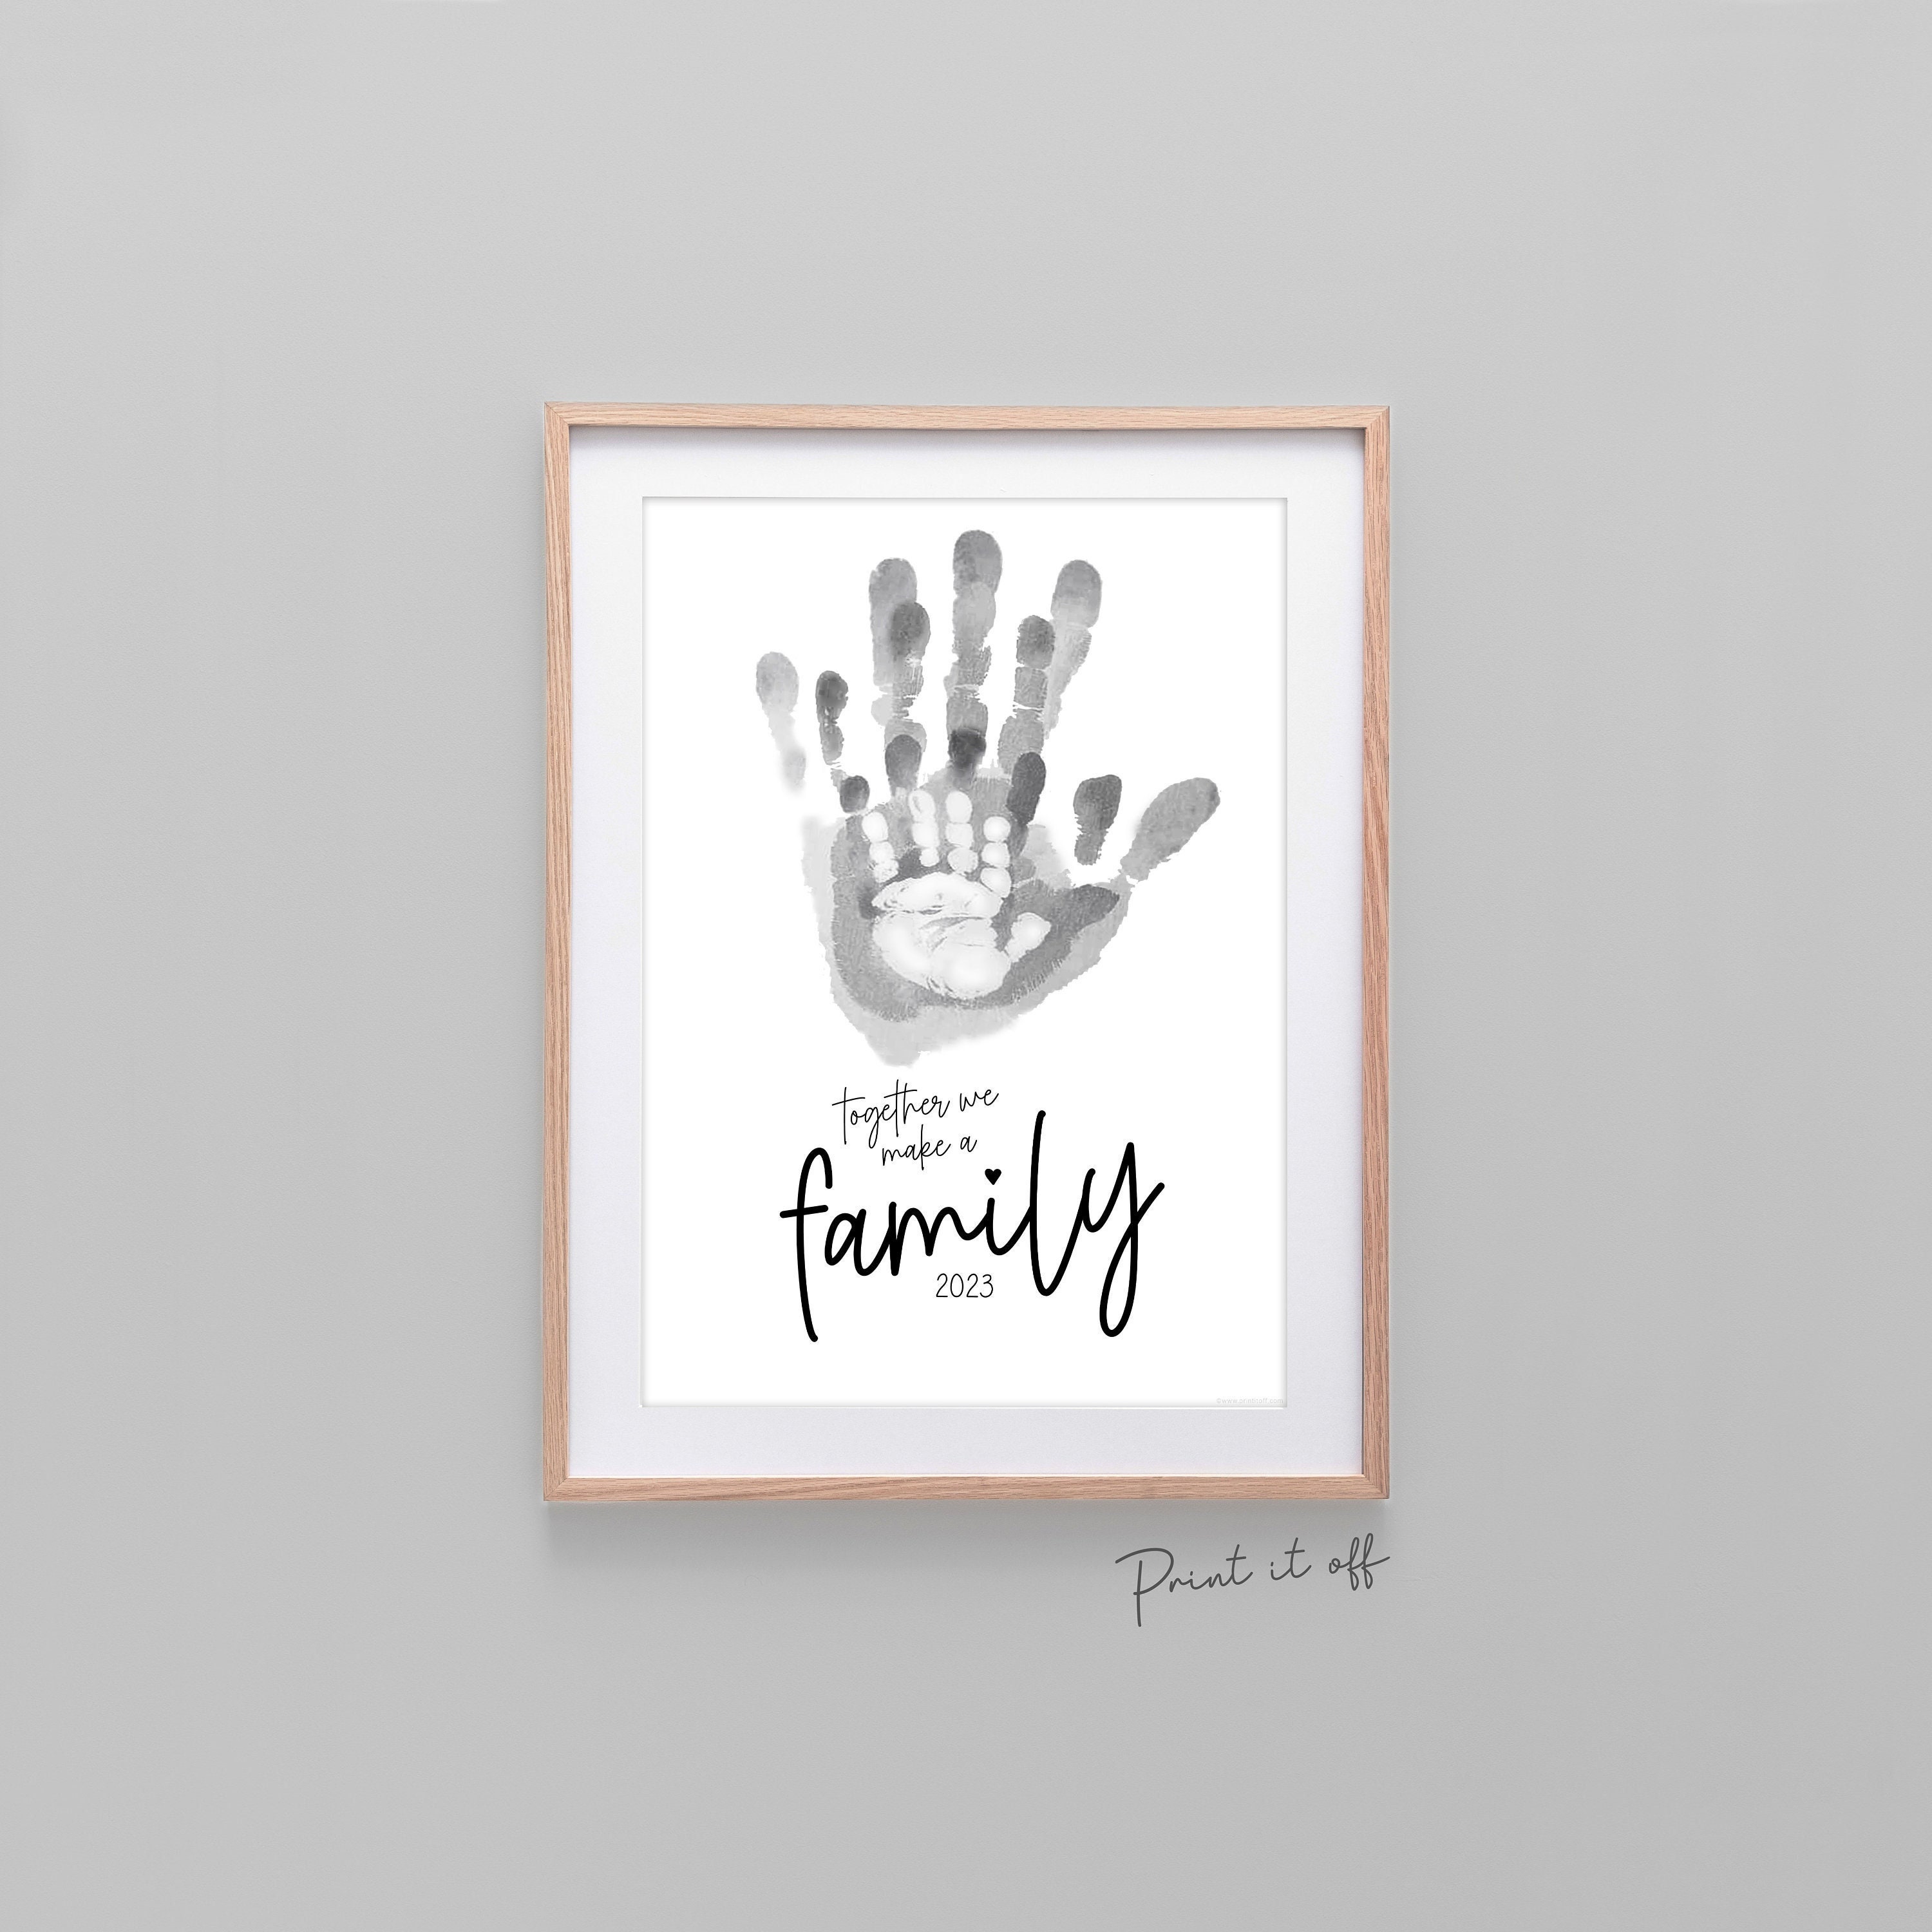  Family Handprint Frame Kit, Family Keepsake Frame, DIY Craft  for Family Night, Baby Hand and Footprint Kit, Gifts for New and Expecting  Parents Baby Family, DIY Art Print Frame with